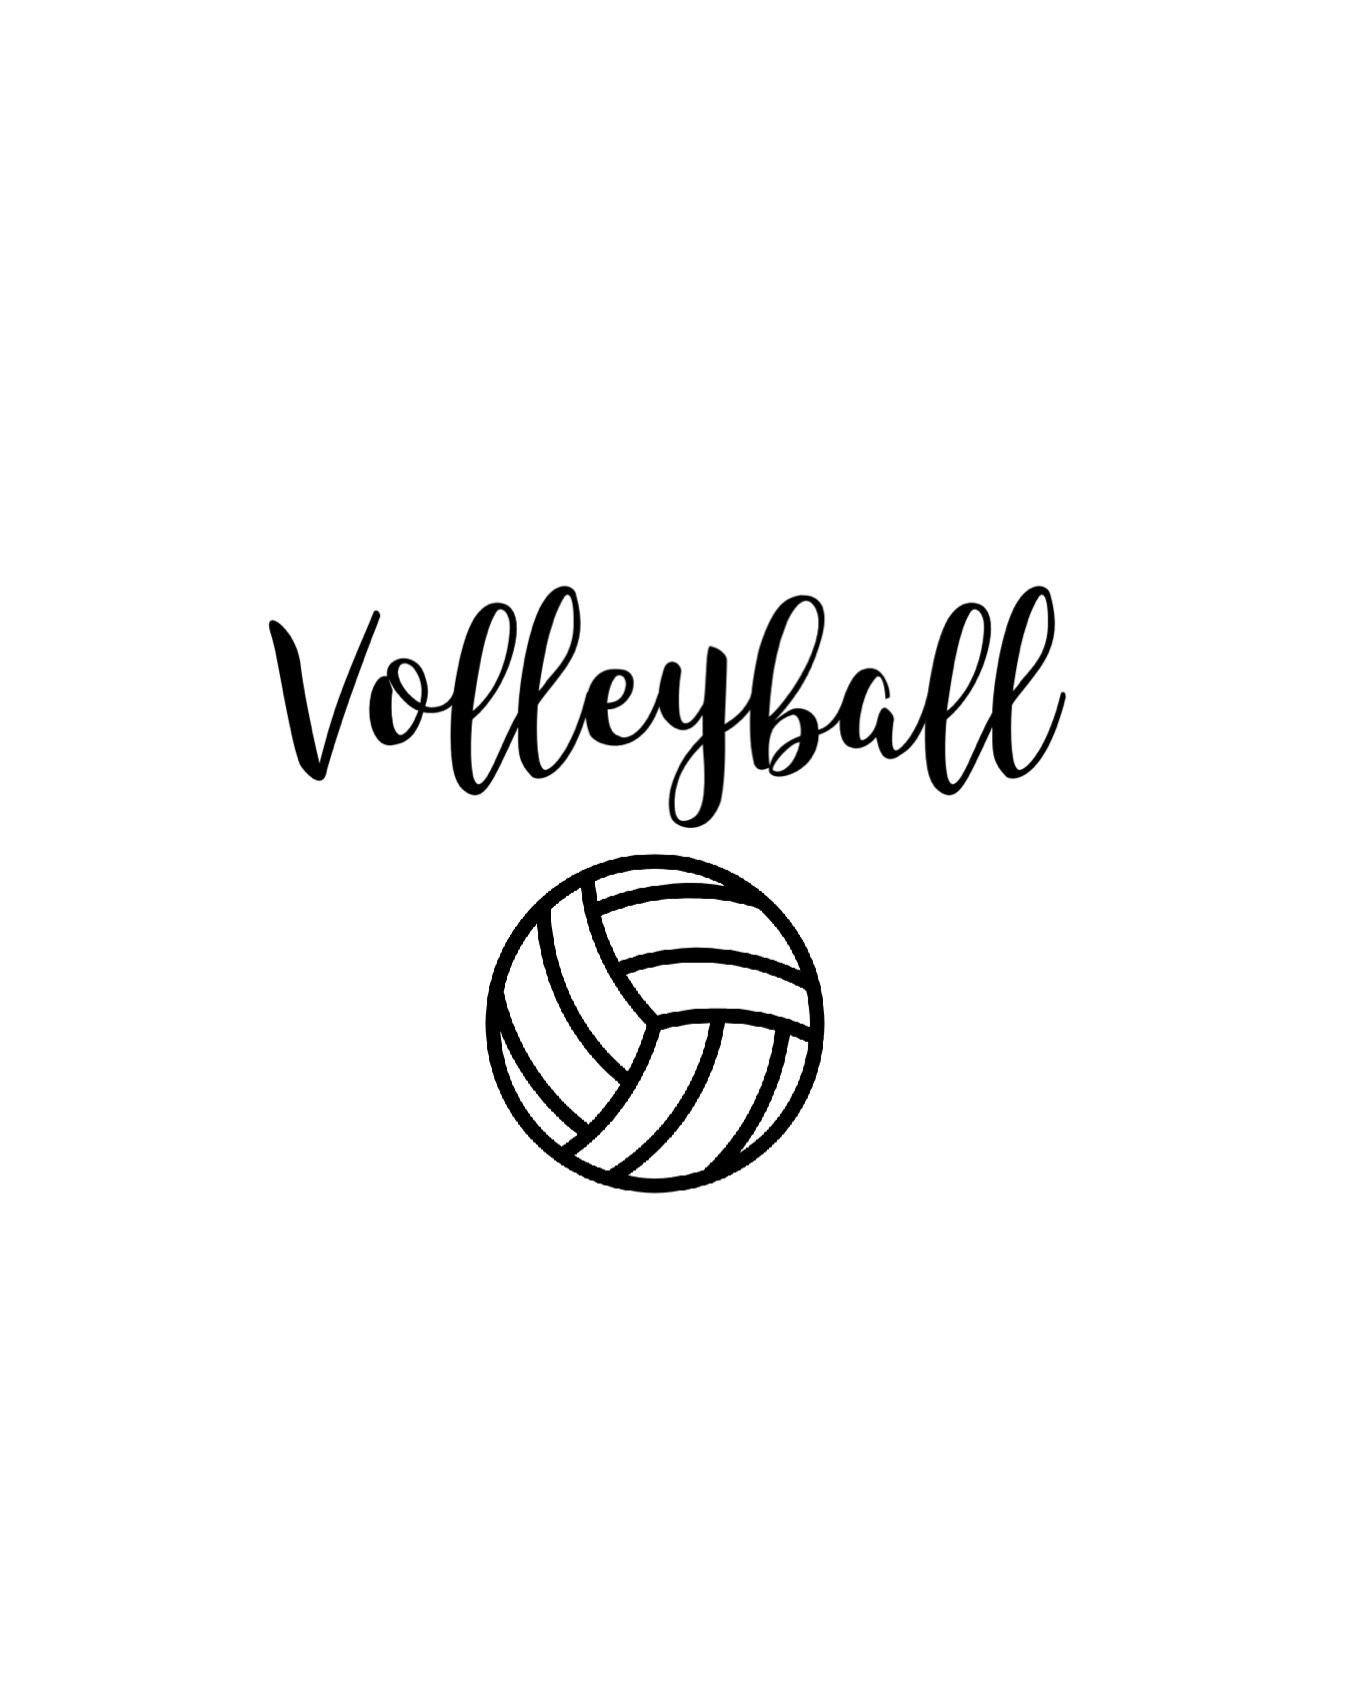 Volleyball Aesthetic Wallpapers - Top Free Volleyball Aesthetic ...